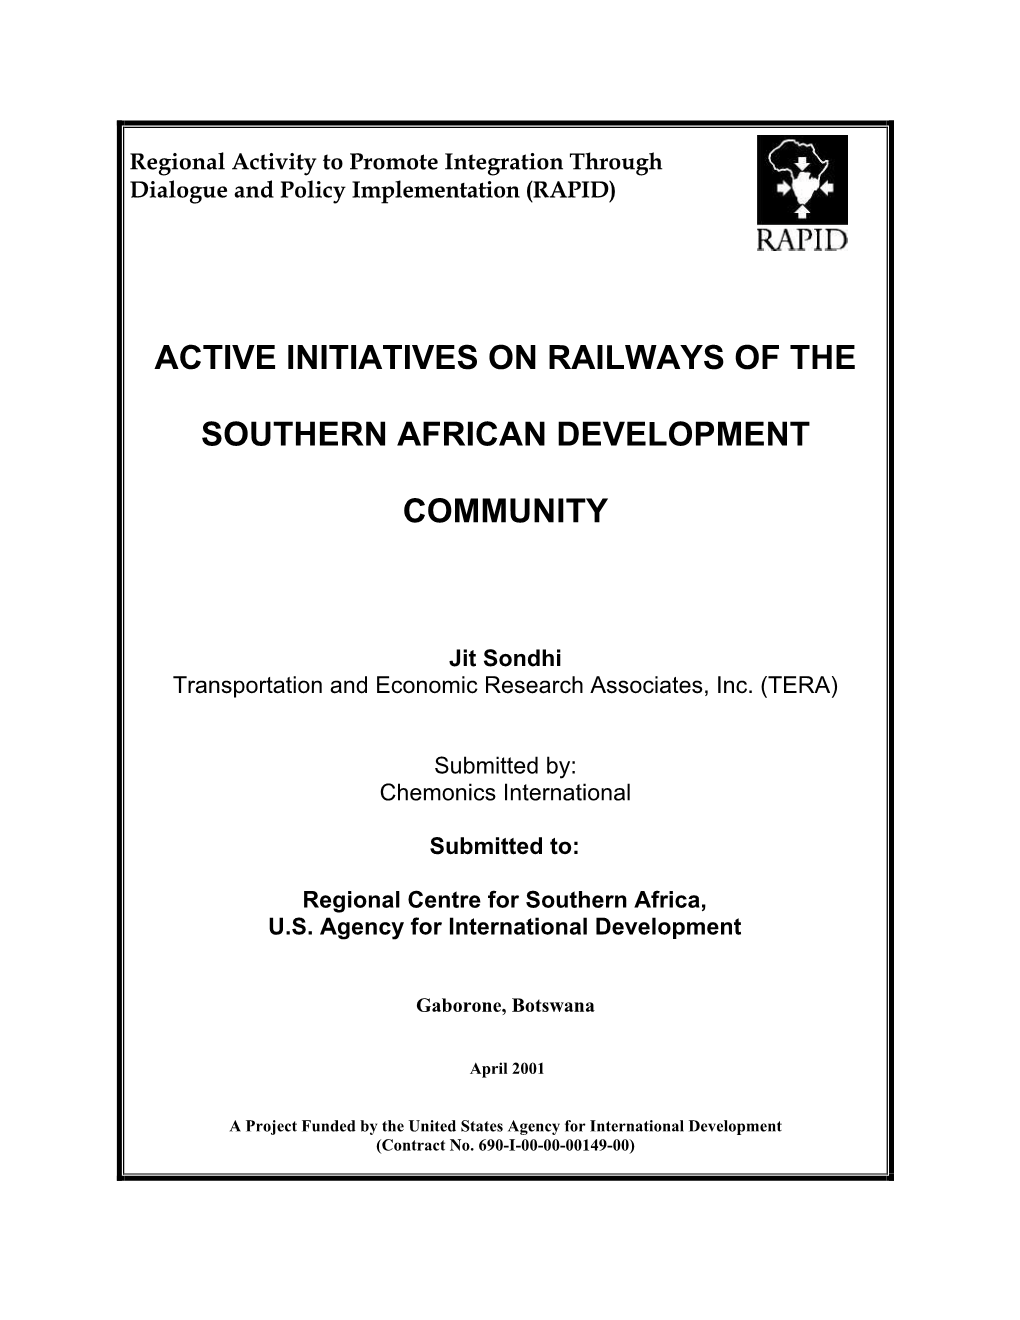 Active Initiatives on Railways of the Southern African